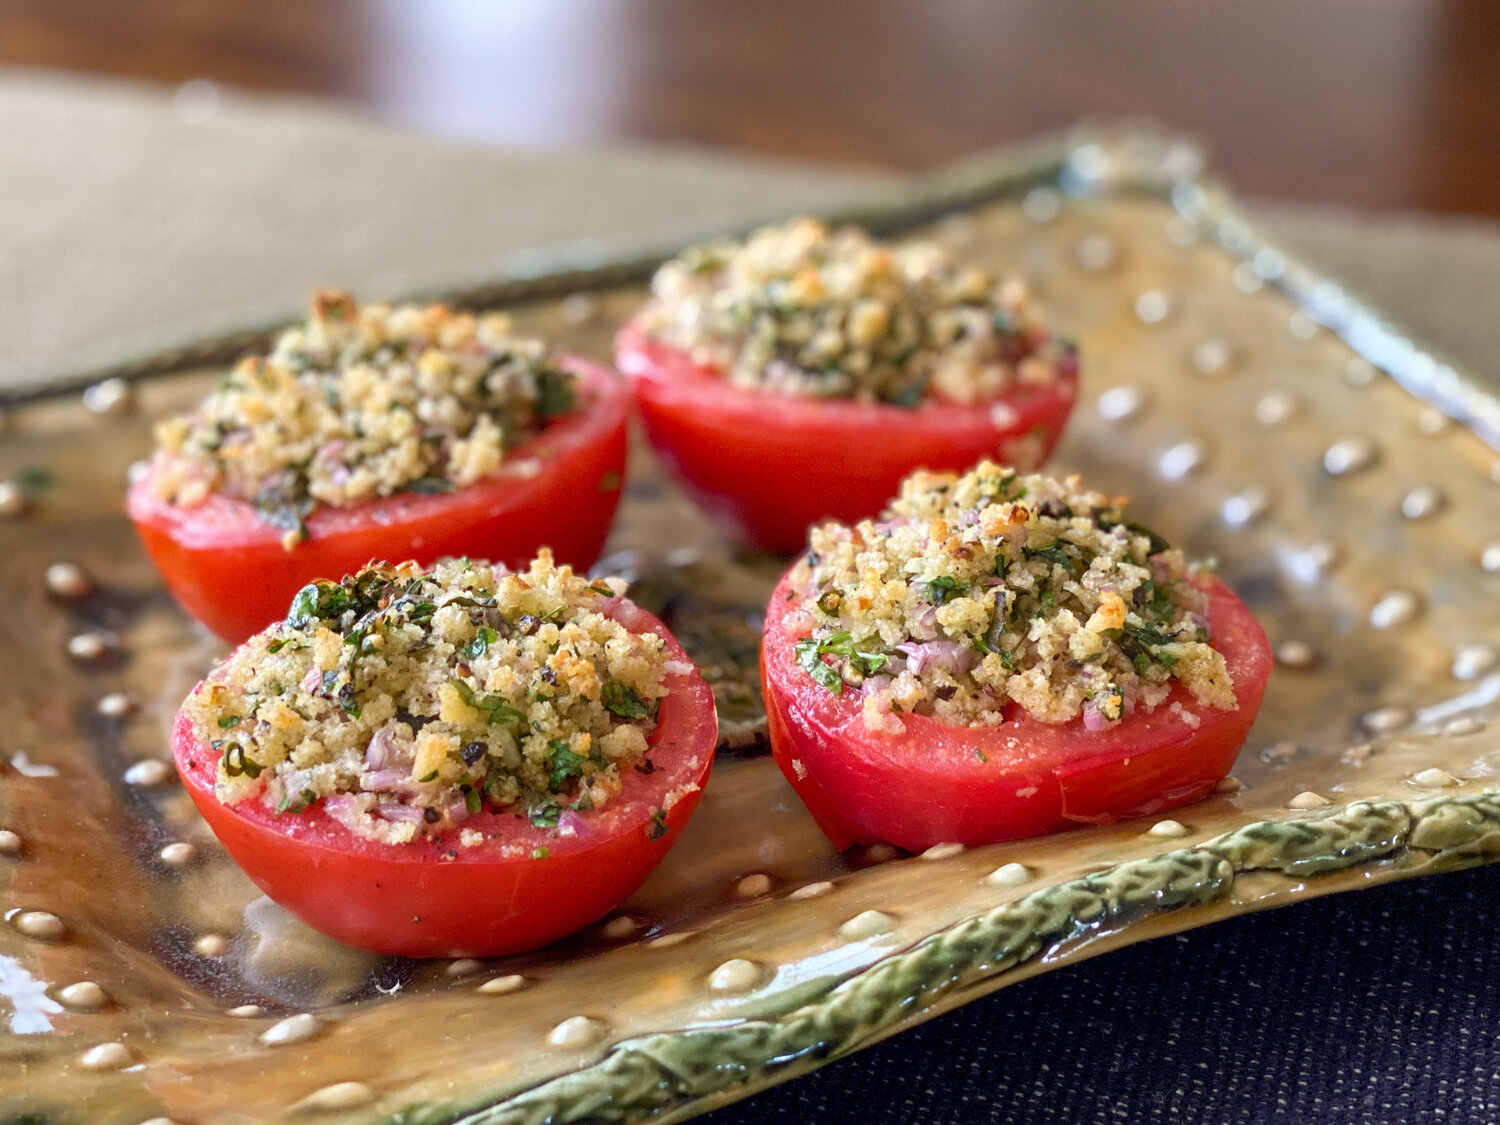 Julia Child's Tomatoes à la Provençale (Tomatoes Stuffed with Bread Crumbs, Herbs and Garlic)